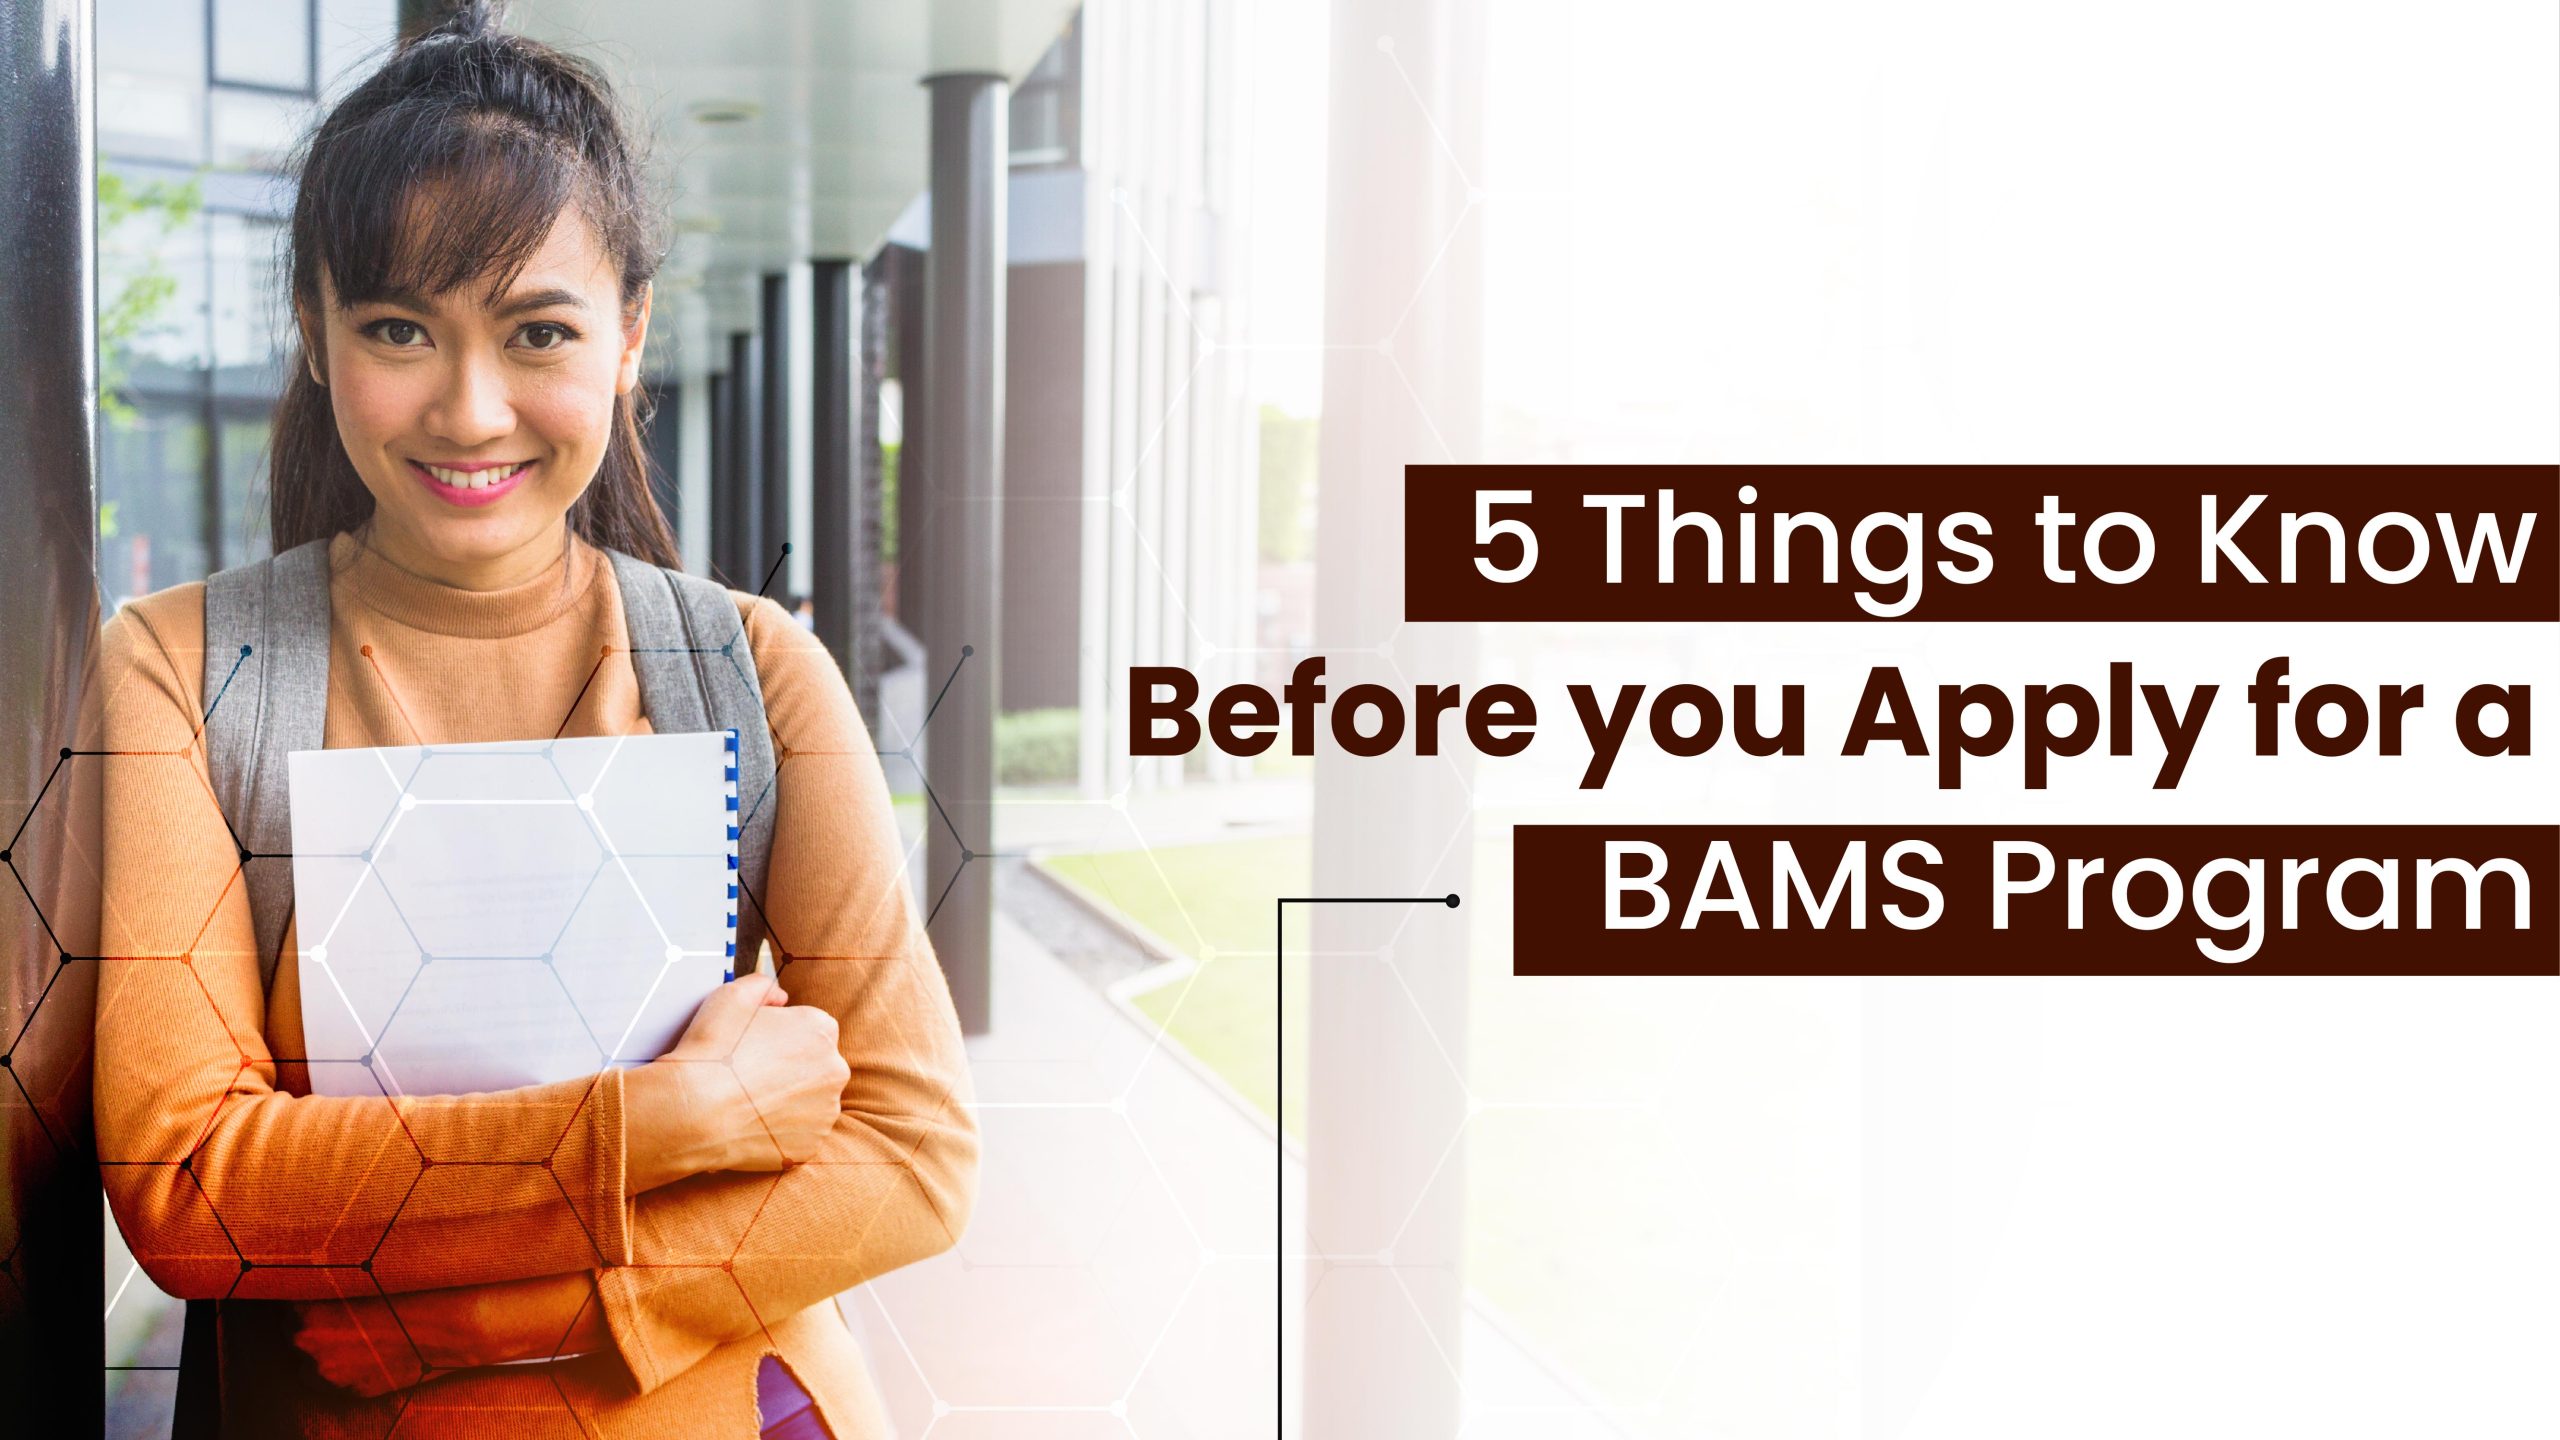 5 Things to Know Before you Apply for a BAMS Program